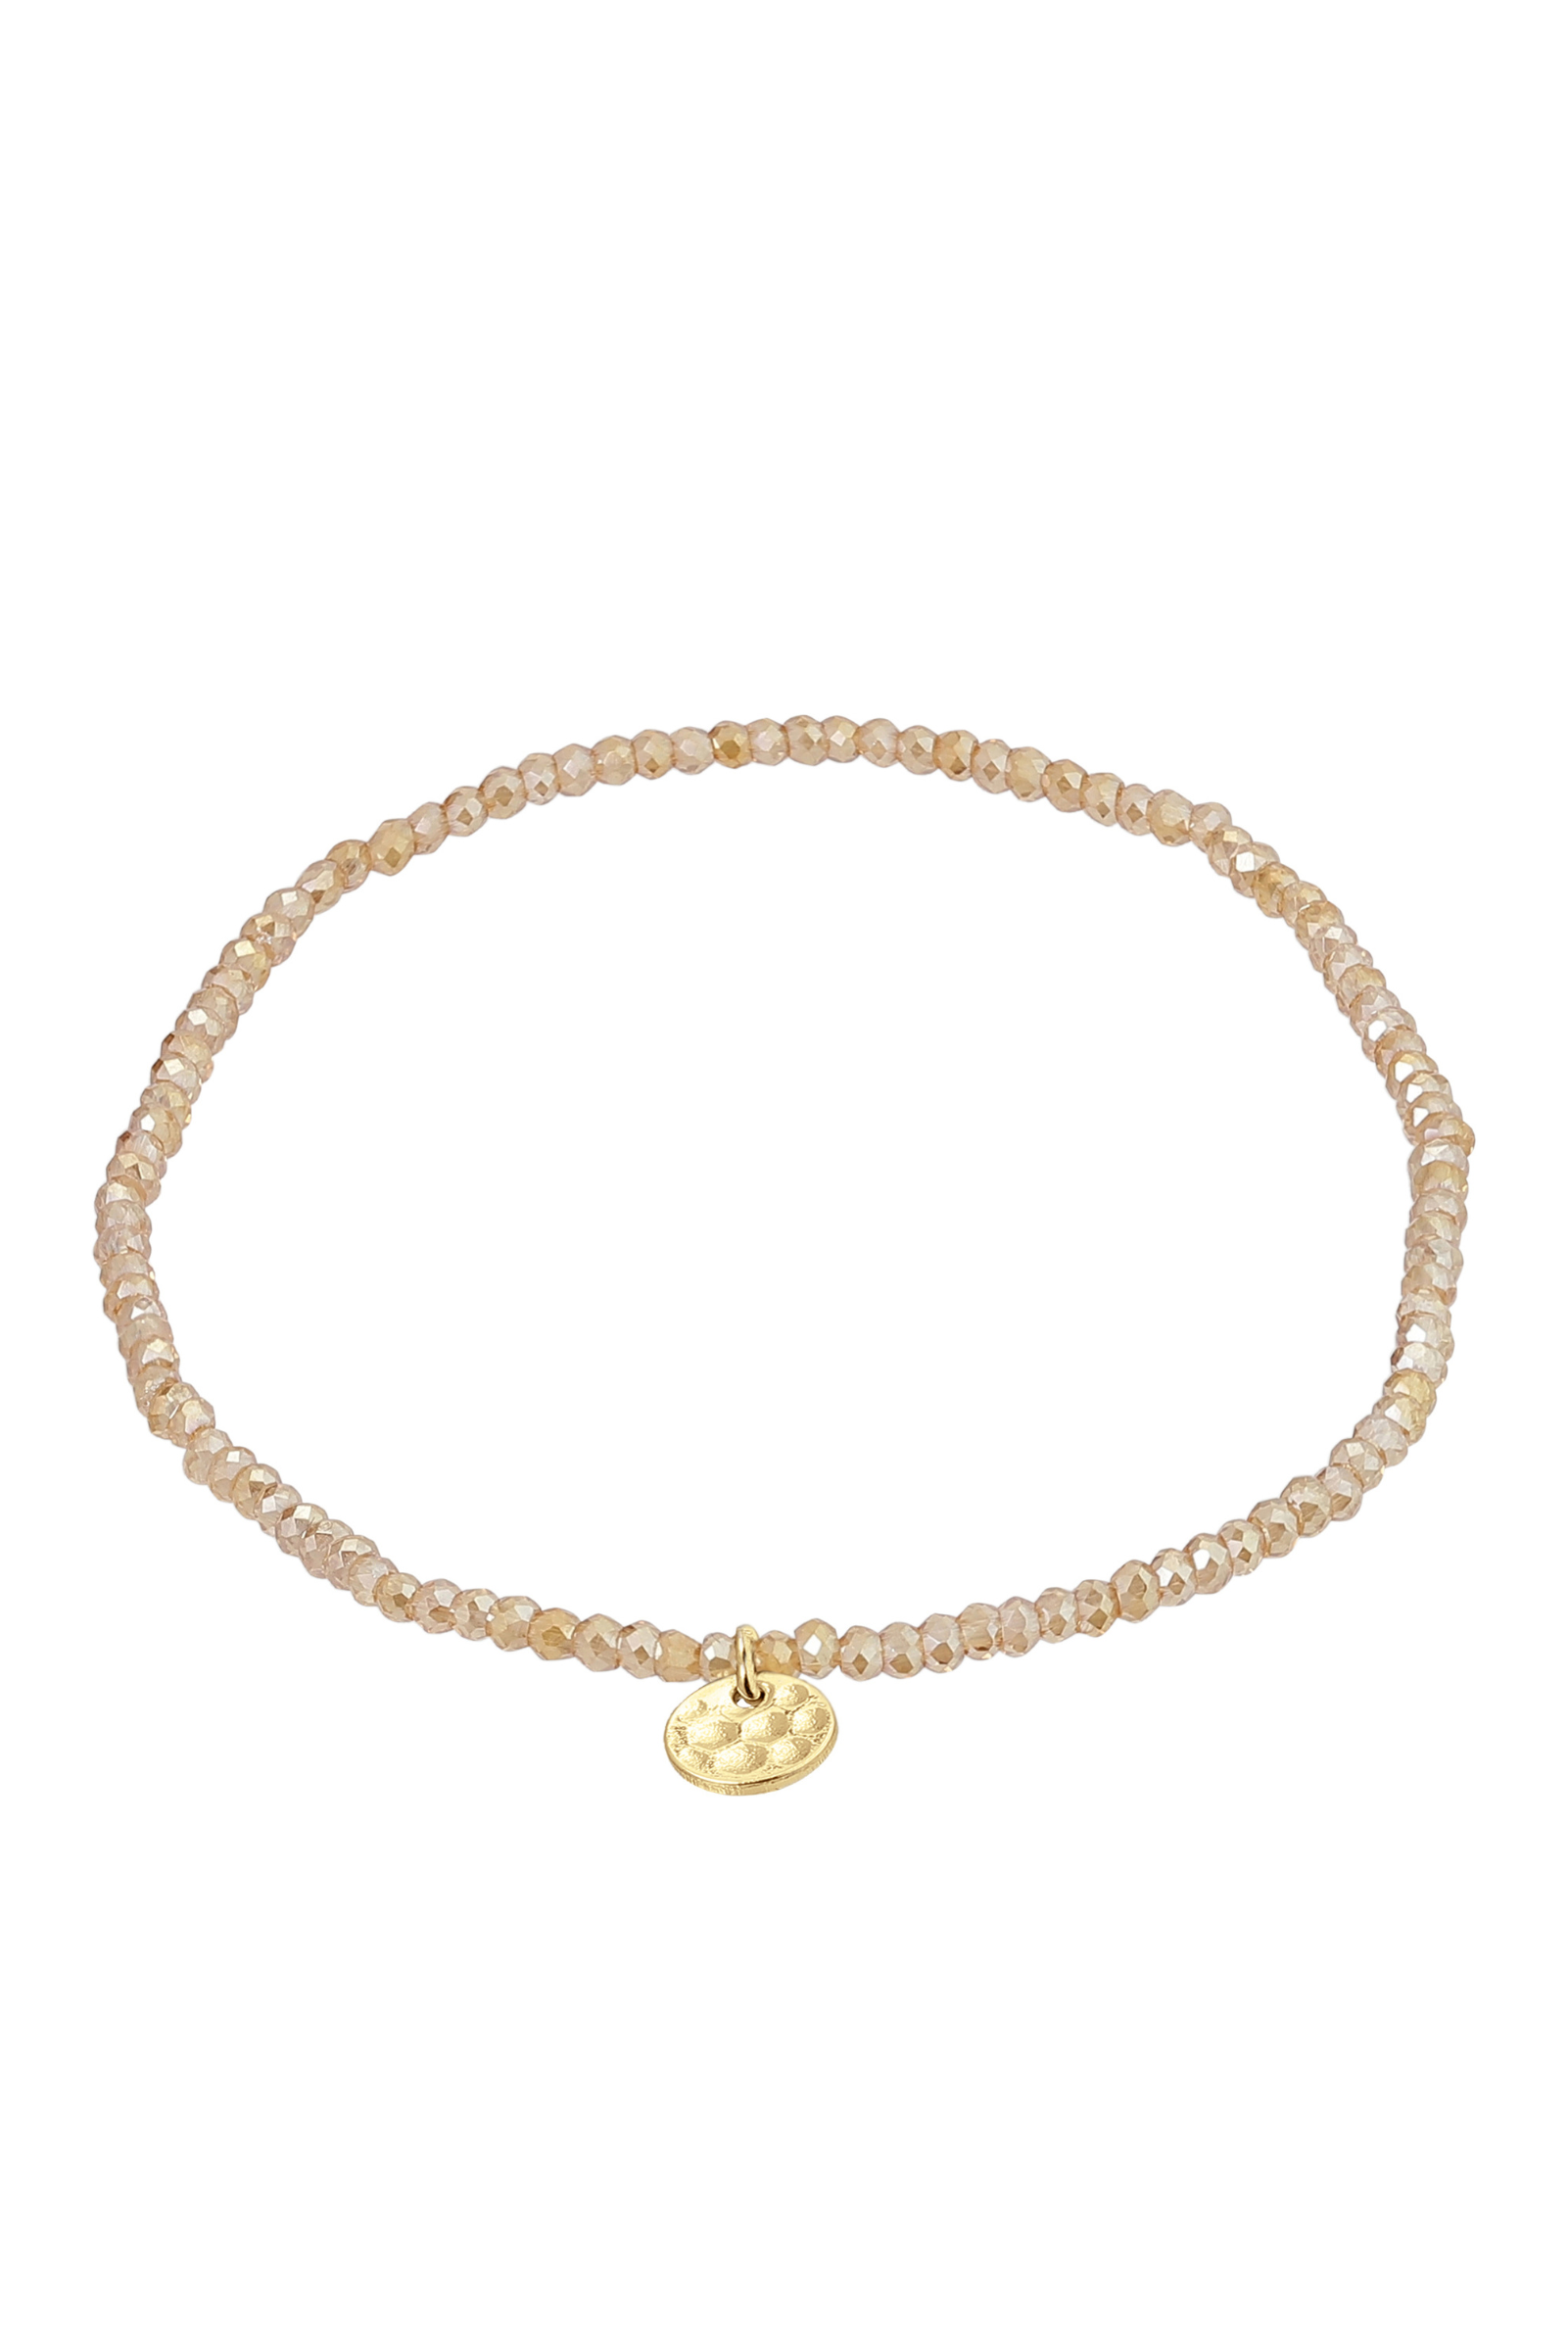 Indie Bracelet - Gold Plated - Peach